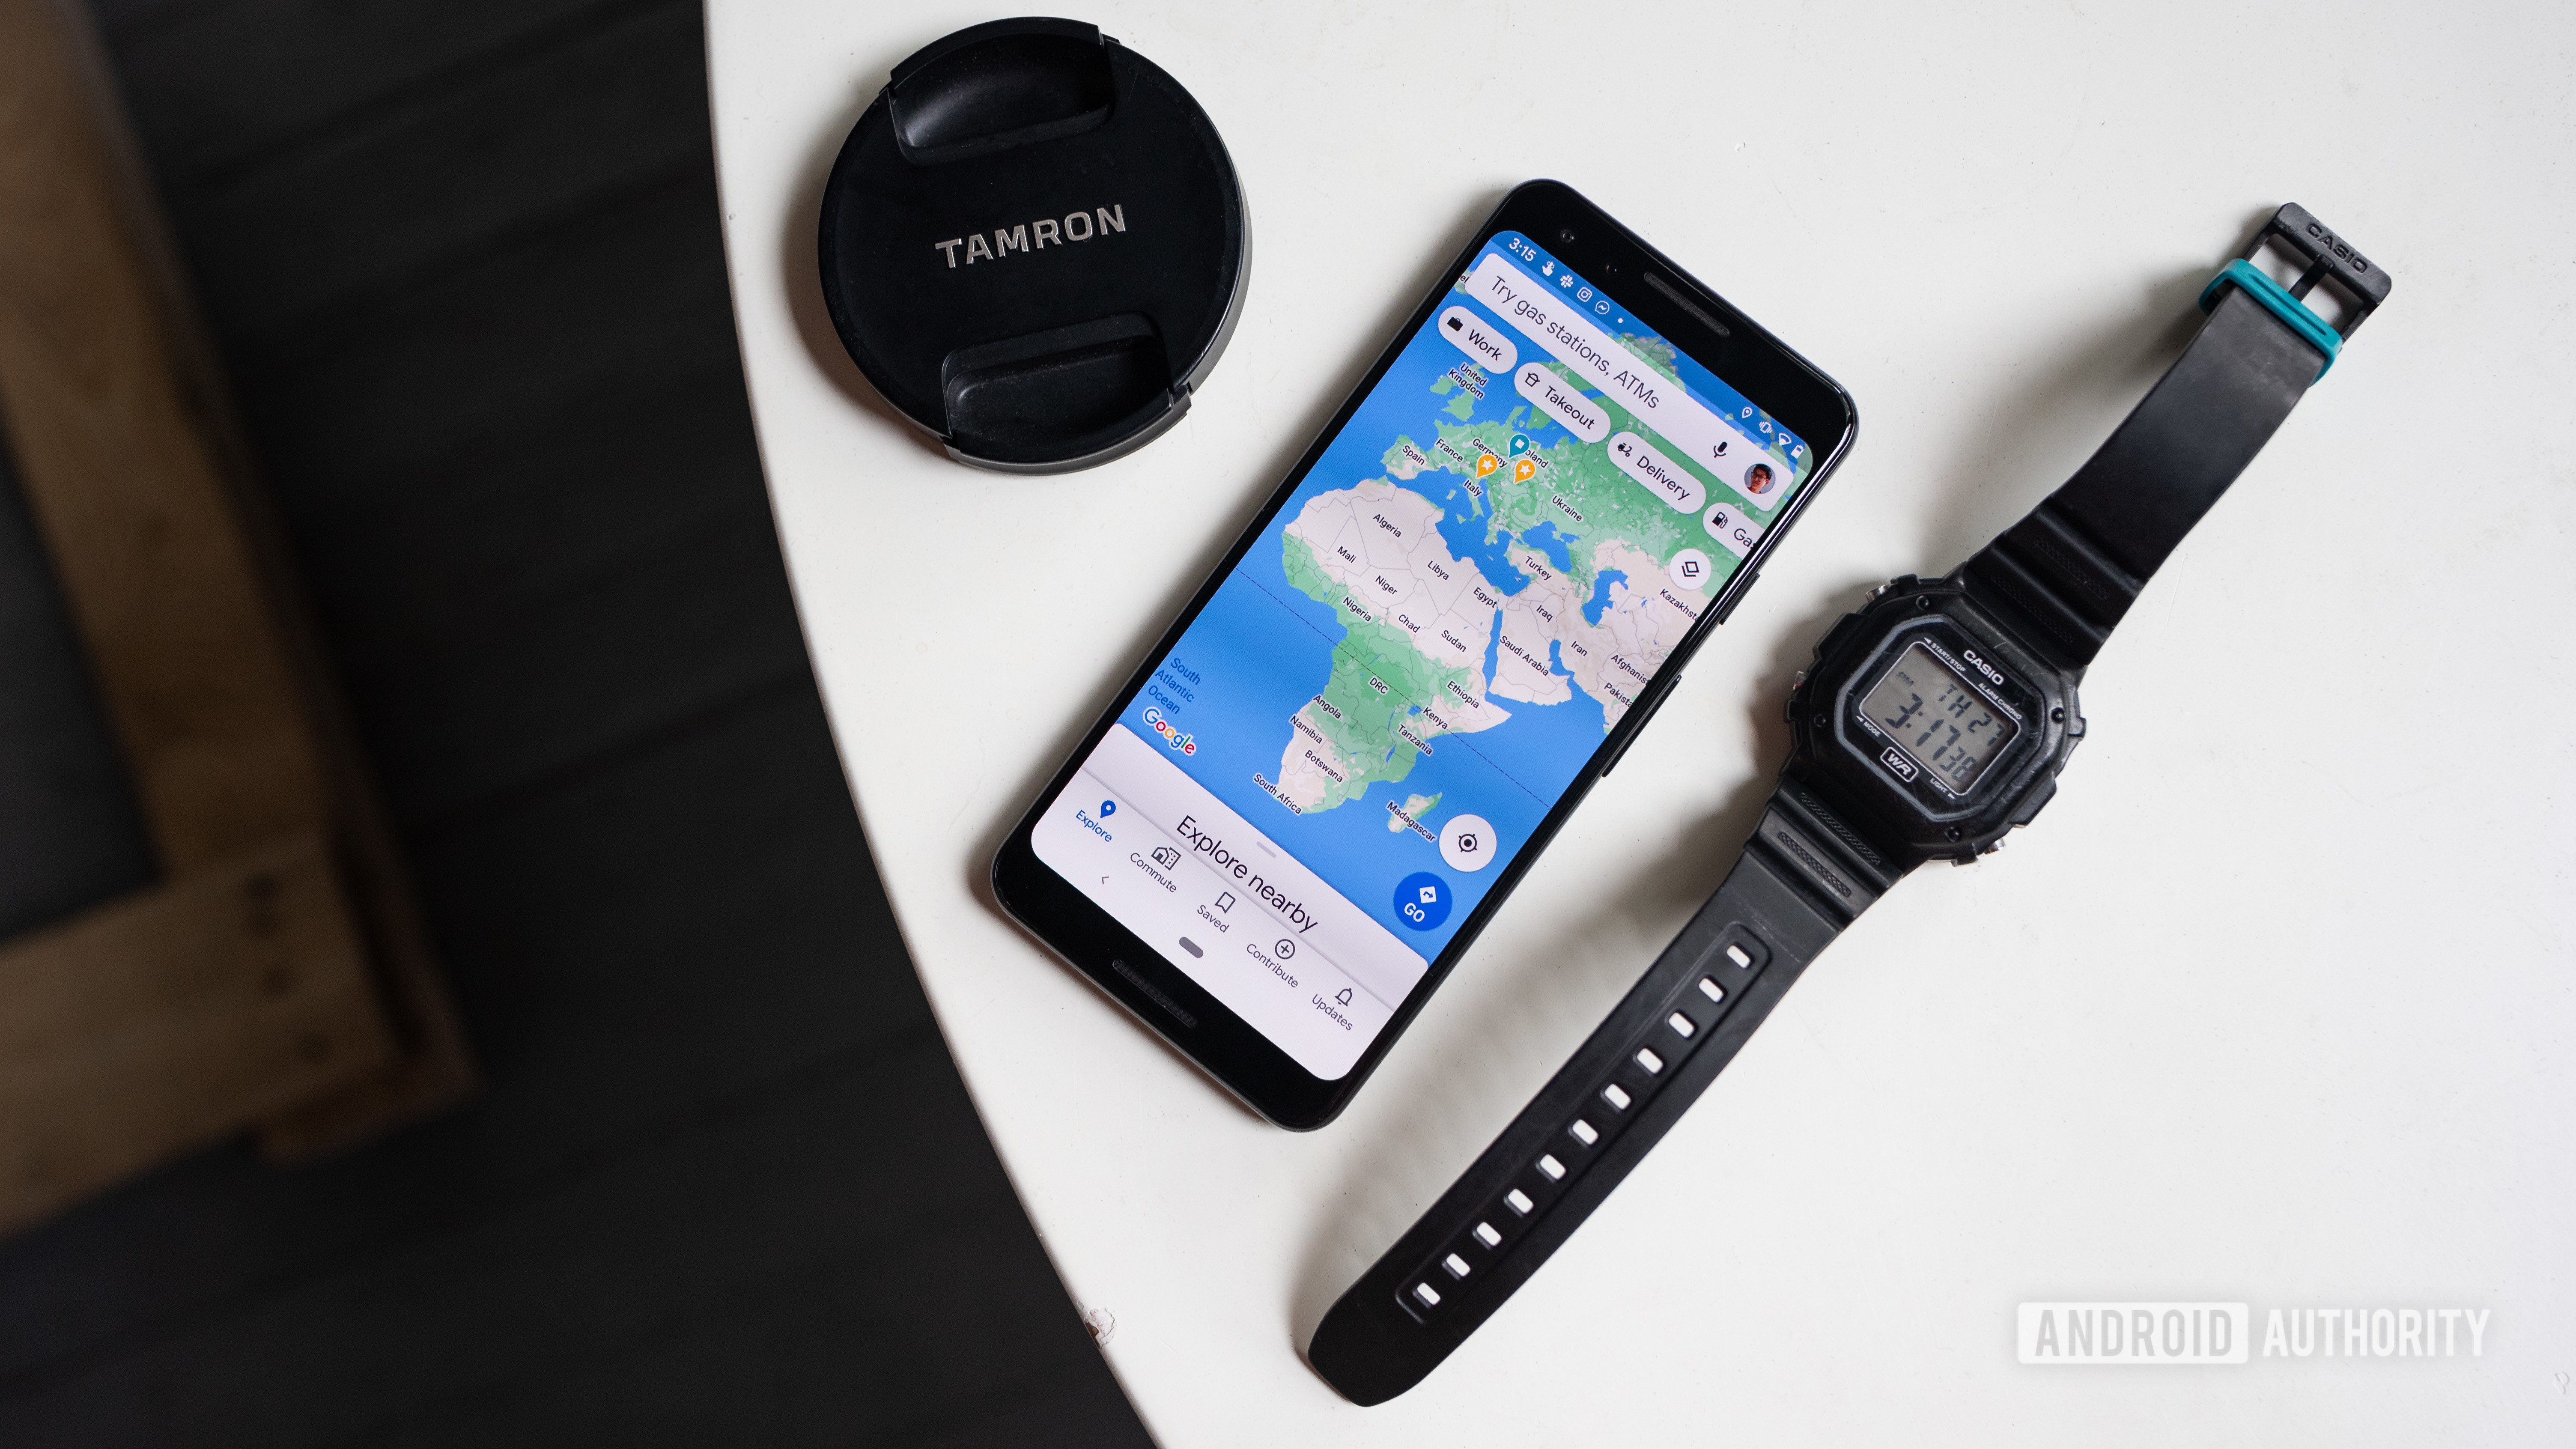 An aerial photo of the Google Maps app open on a Google Pixel 3 smartphone, which is flanked by a Tamron lens cap and Casio watch on a white table.